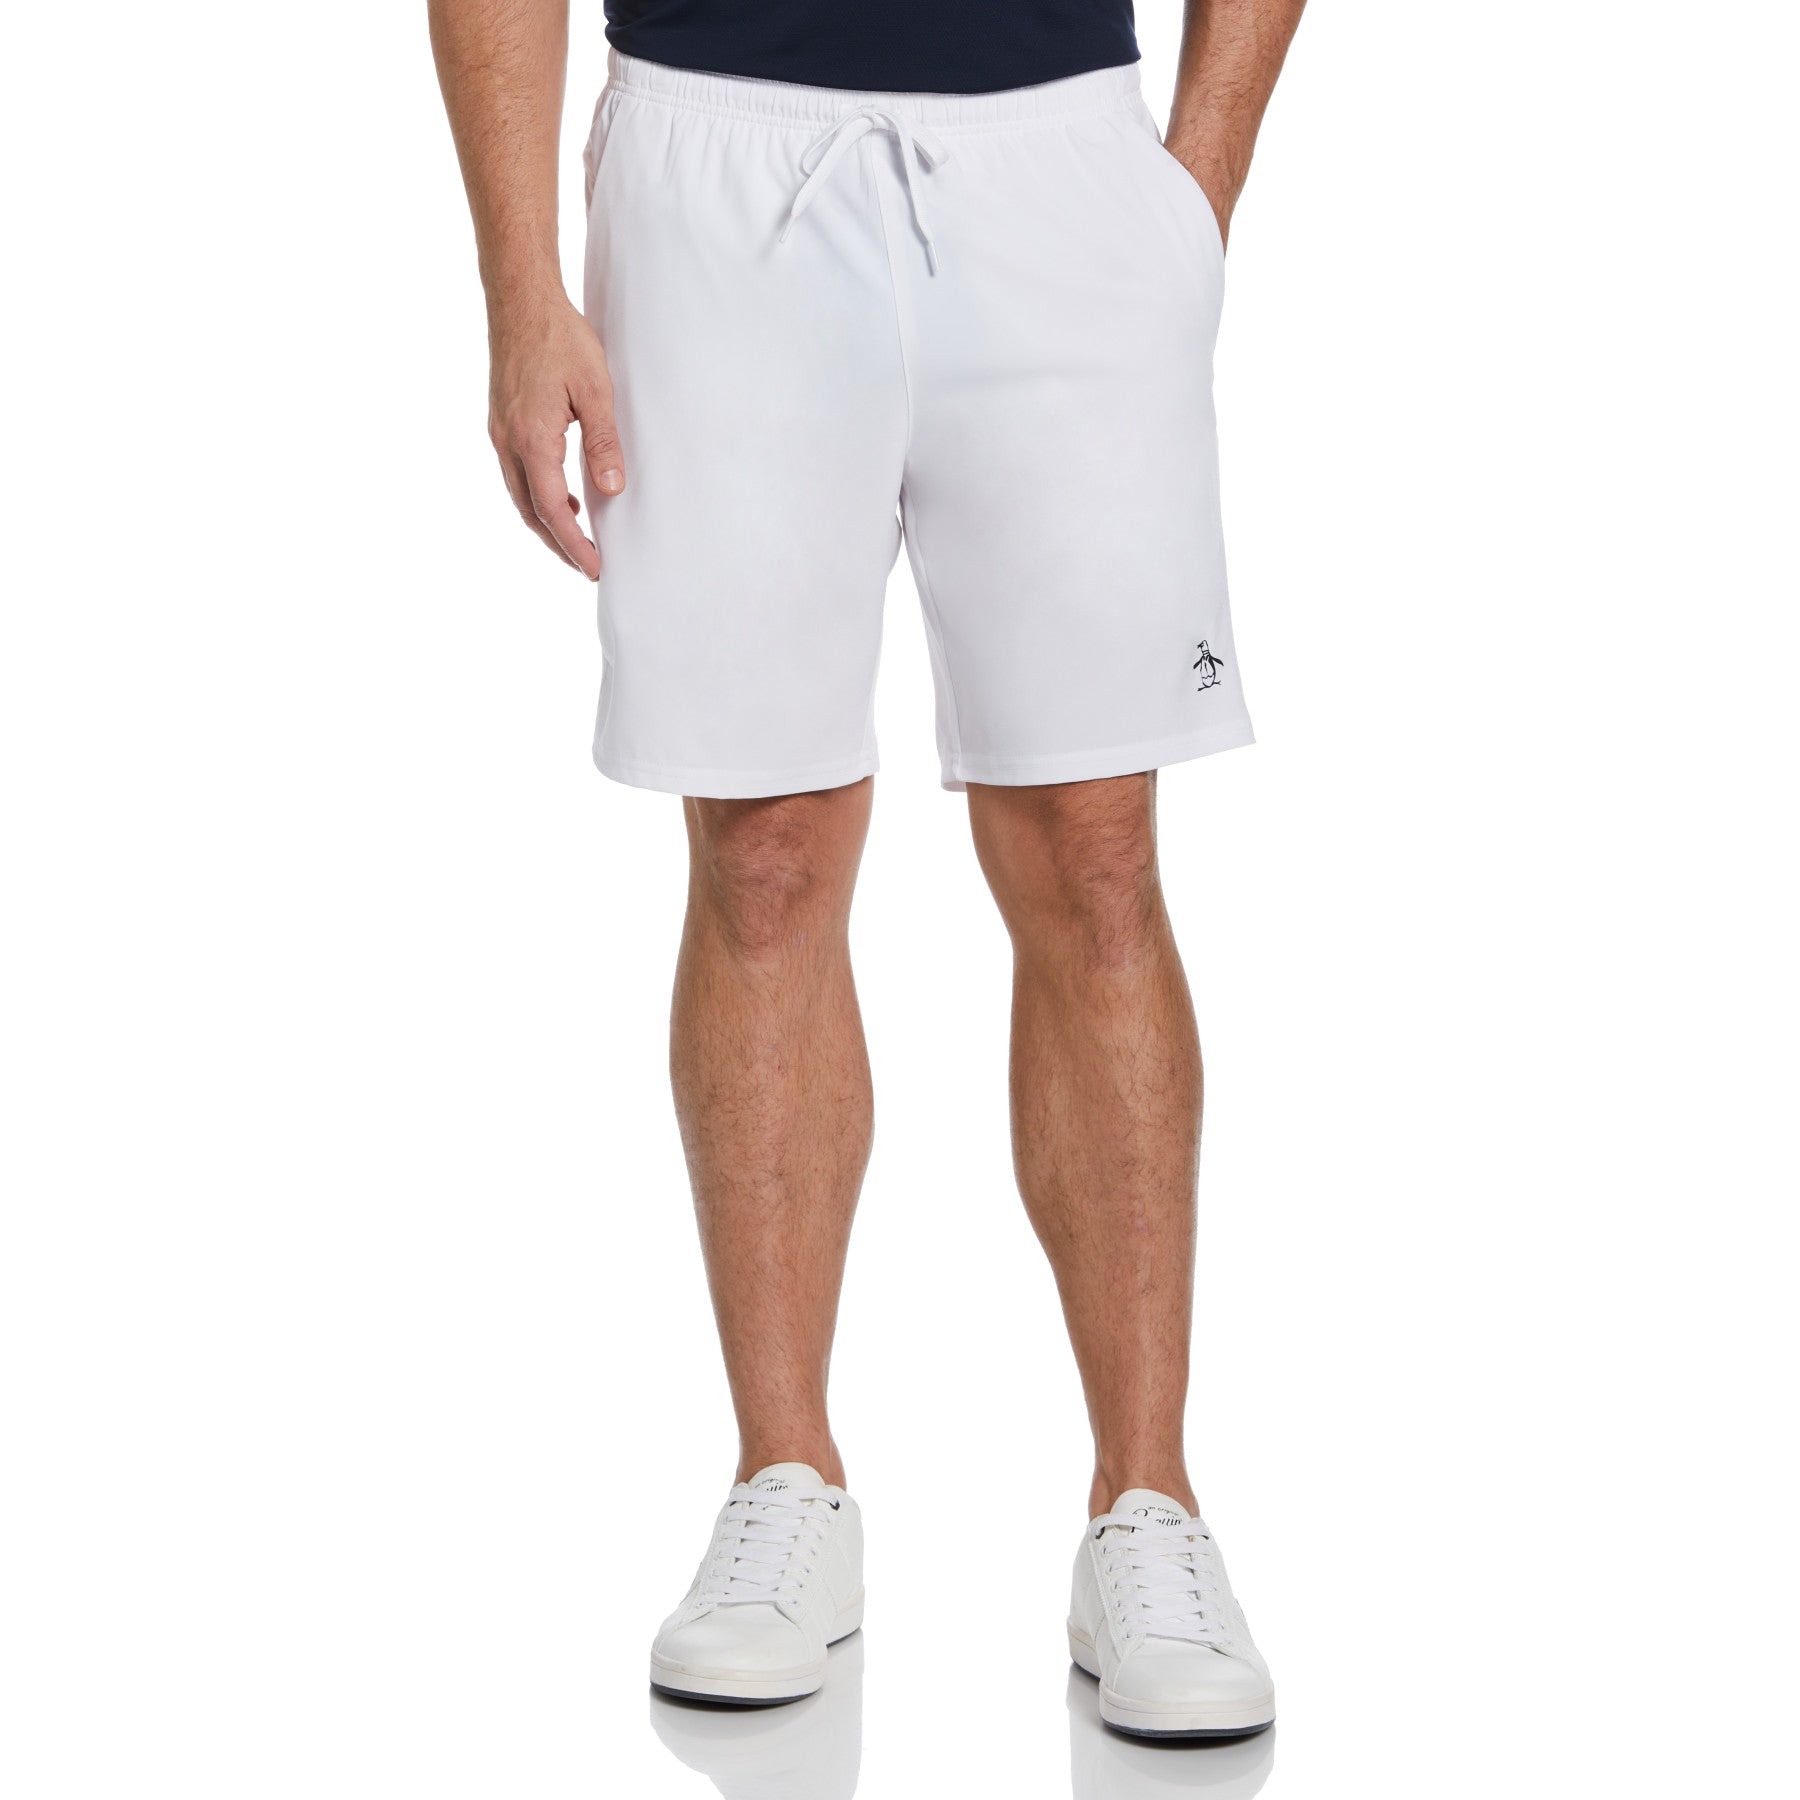 View Solid Tennis Shorts In Bright White information